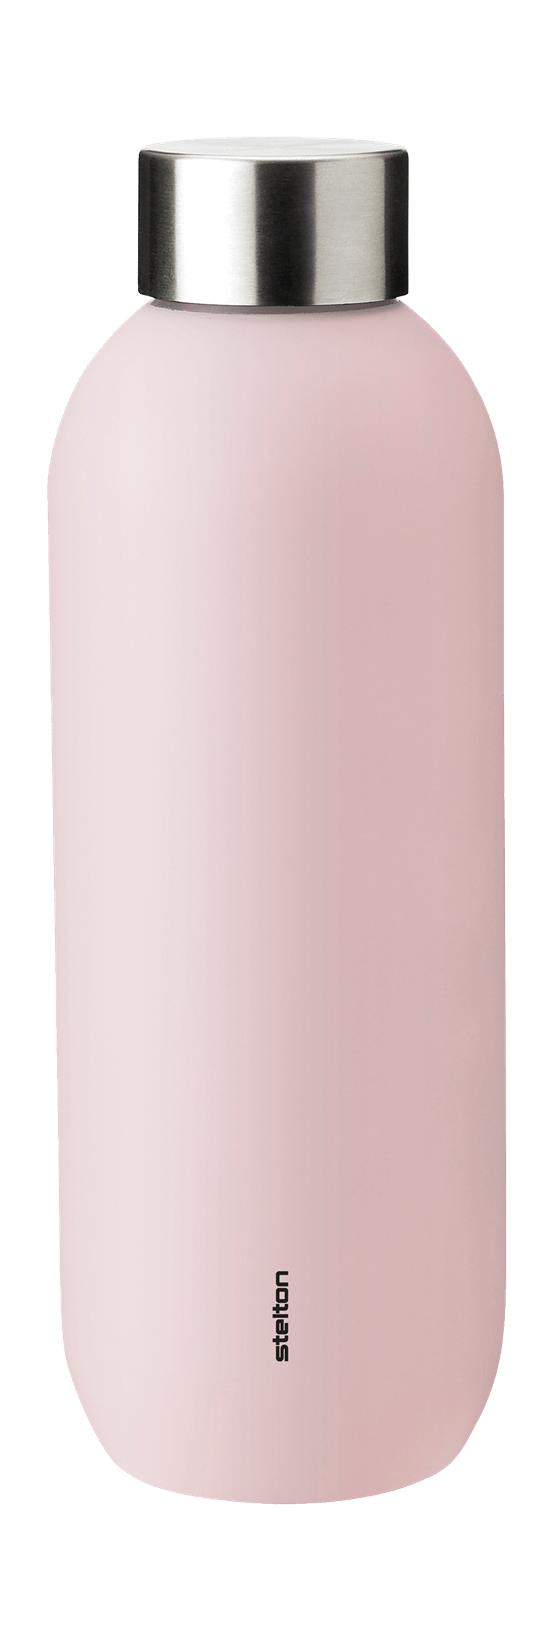 Stelton Keep Cool Termo Flasche 0,6 L, Soft Rose